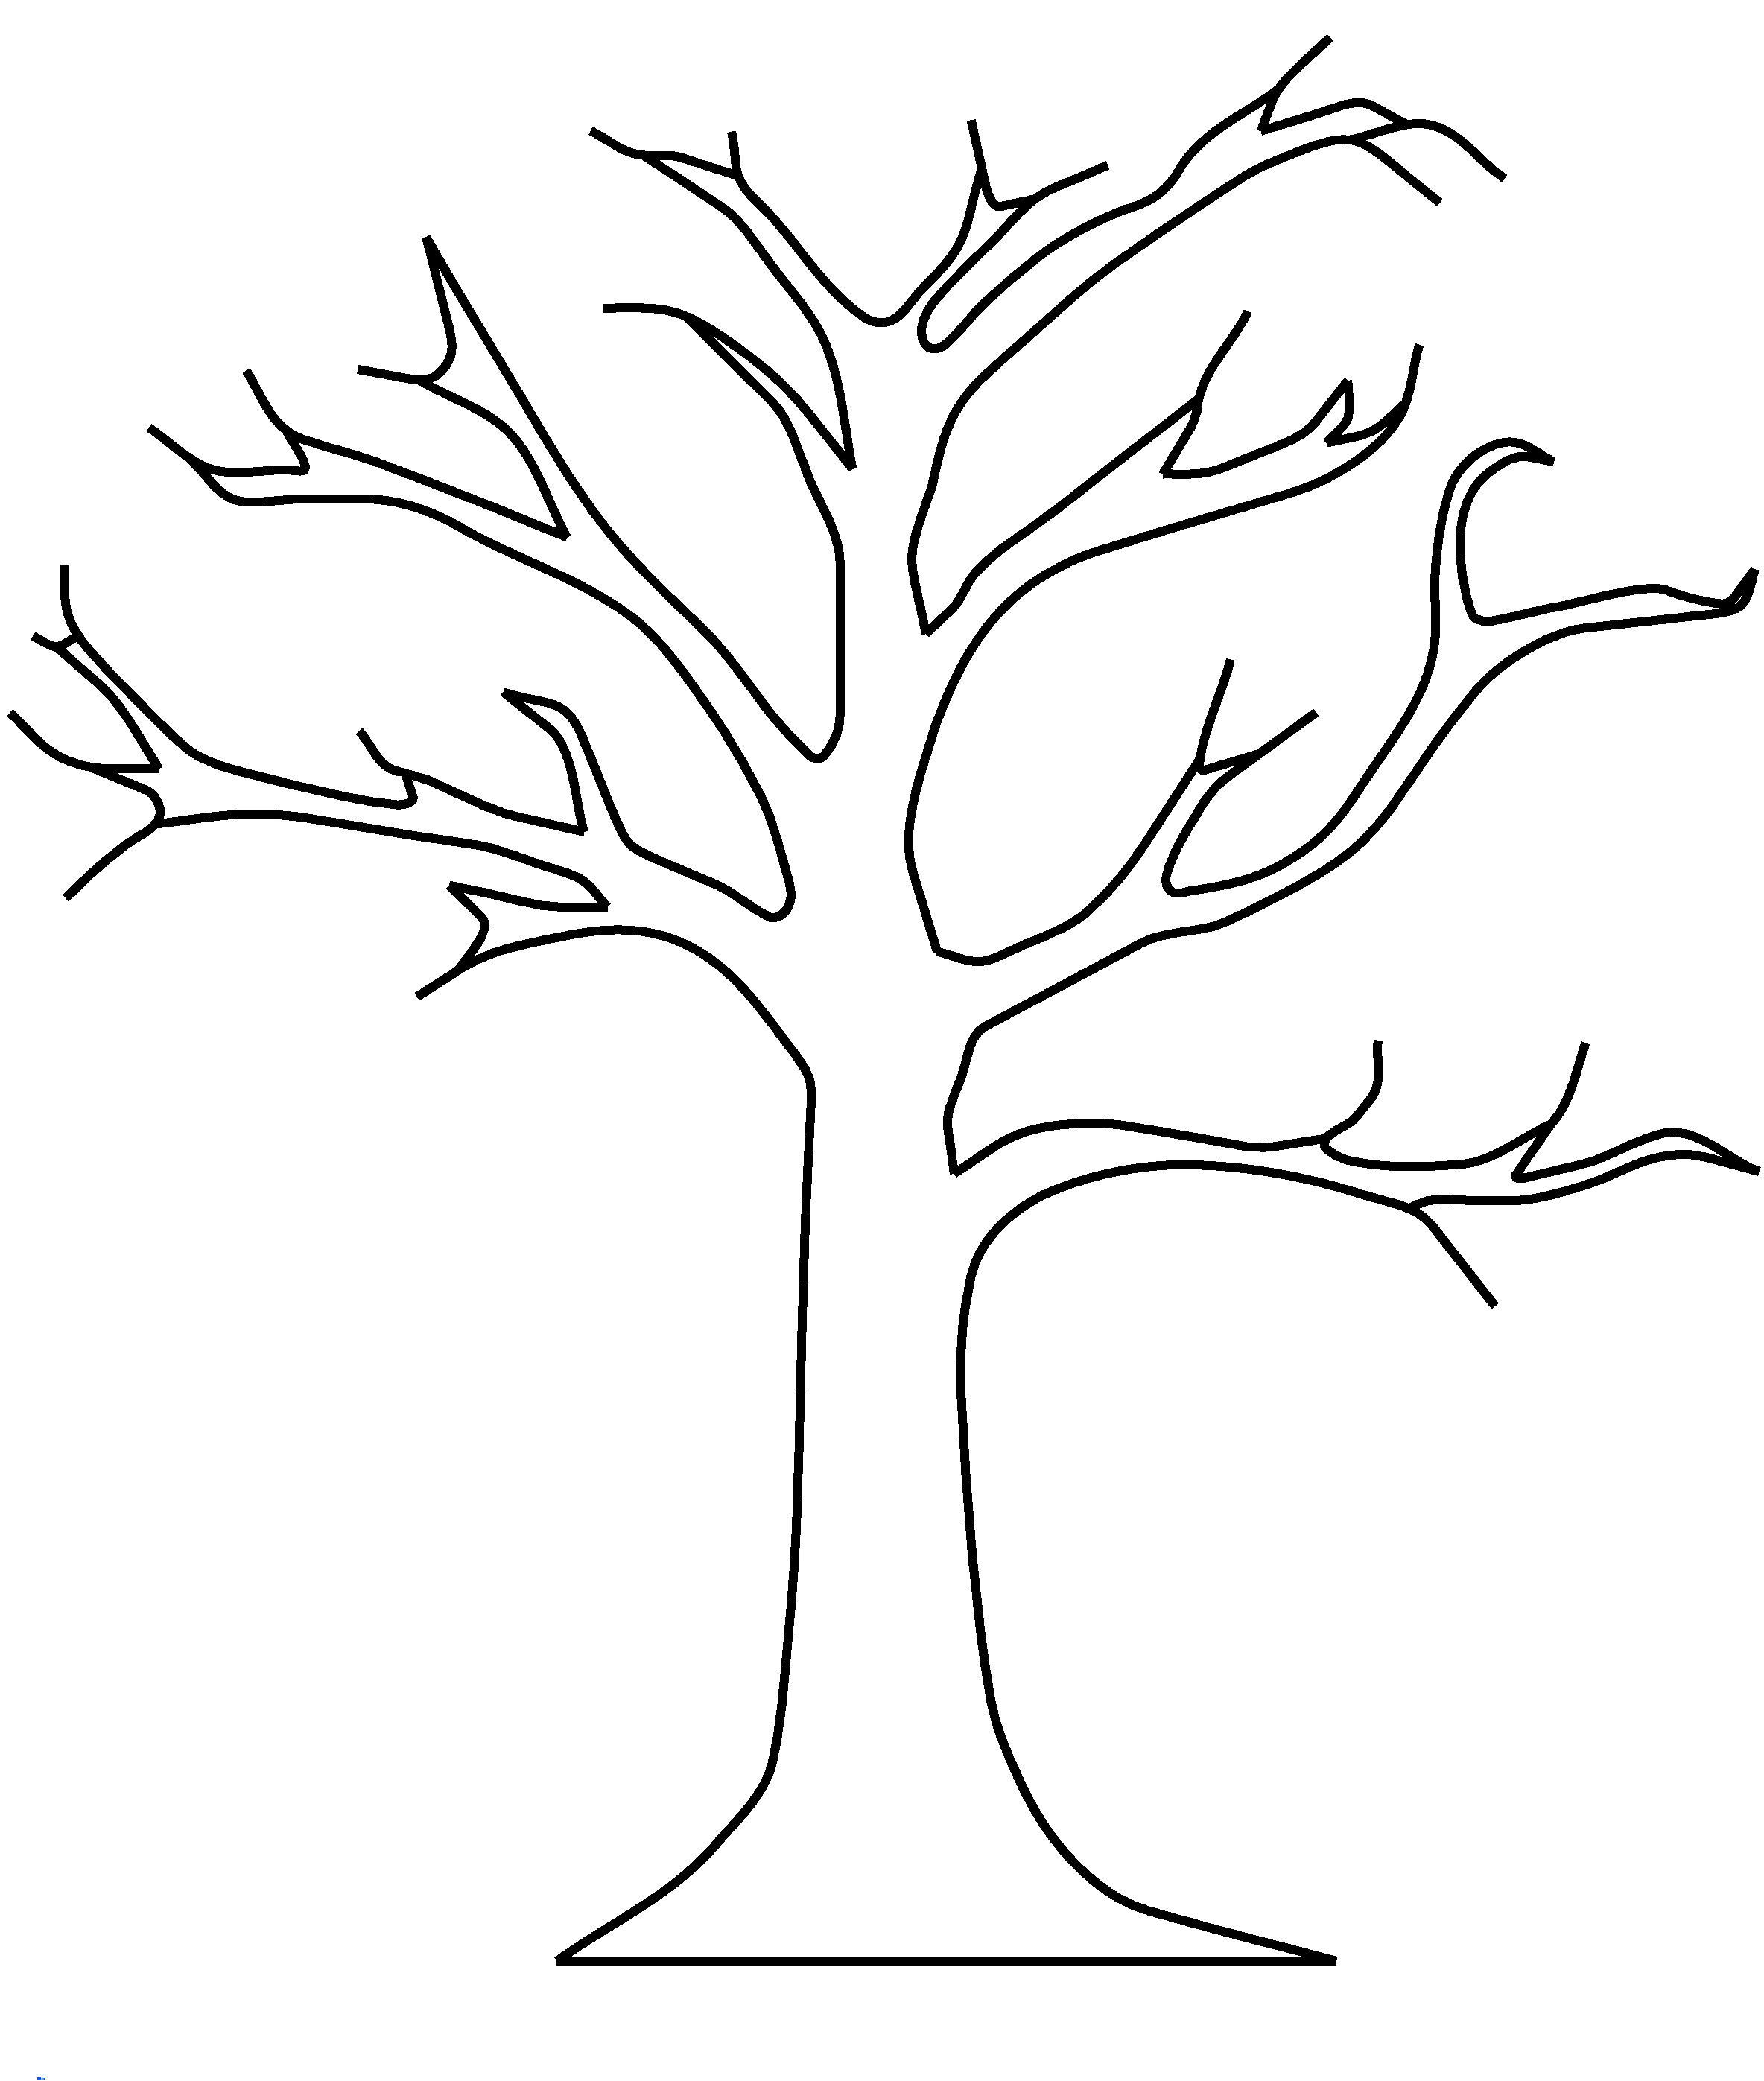 Tree Trunk Clipart.